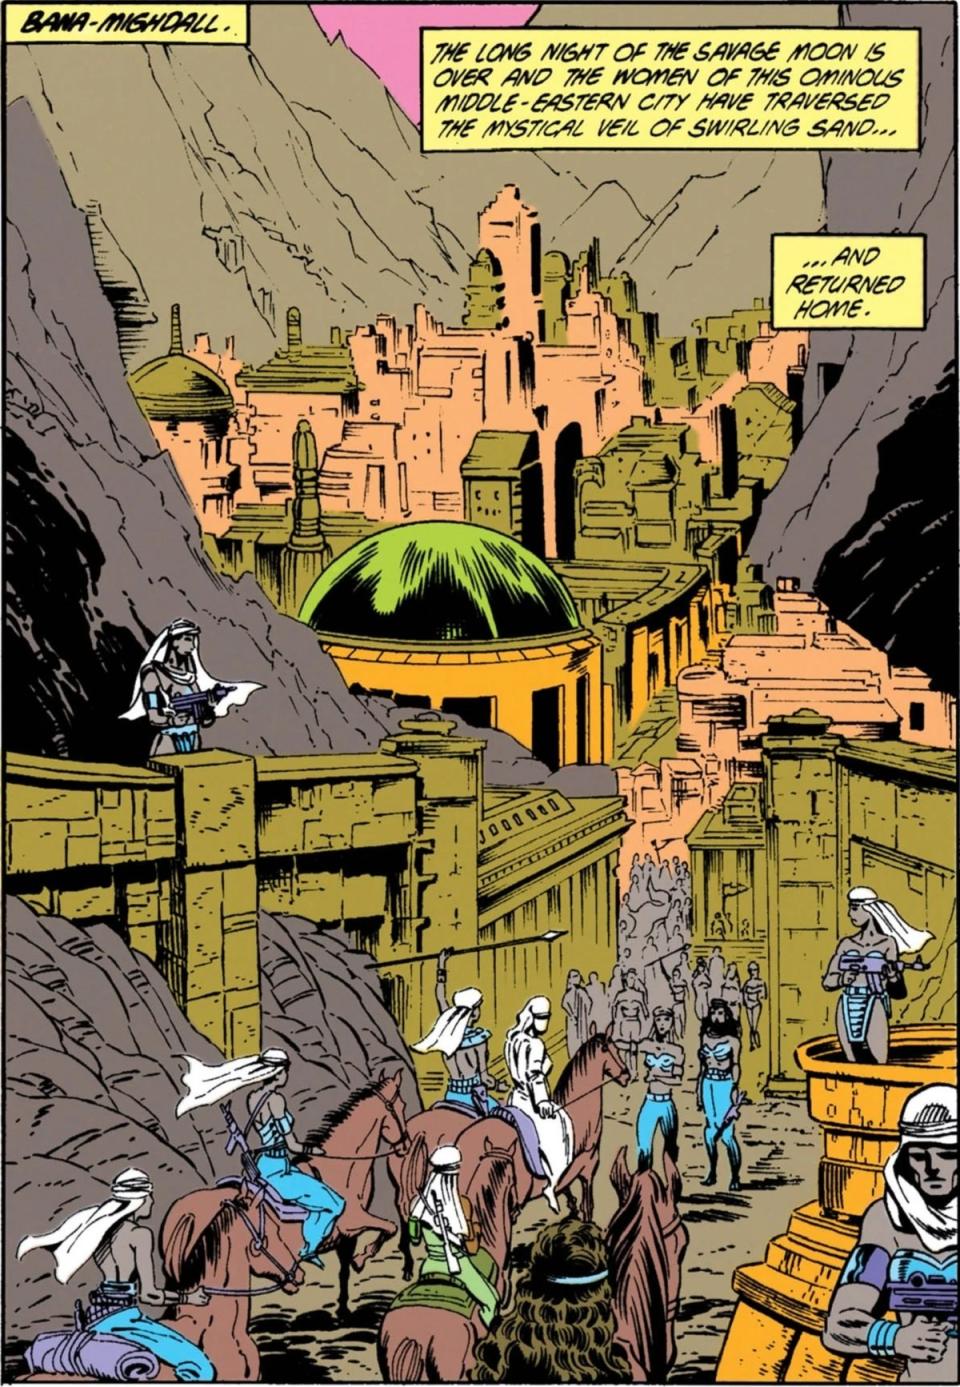 The city of Bana-Mighdall in the pages of Wonder Woman.